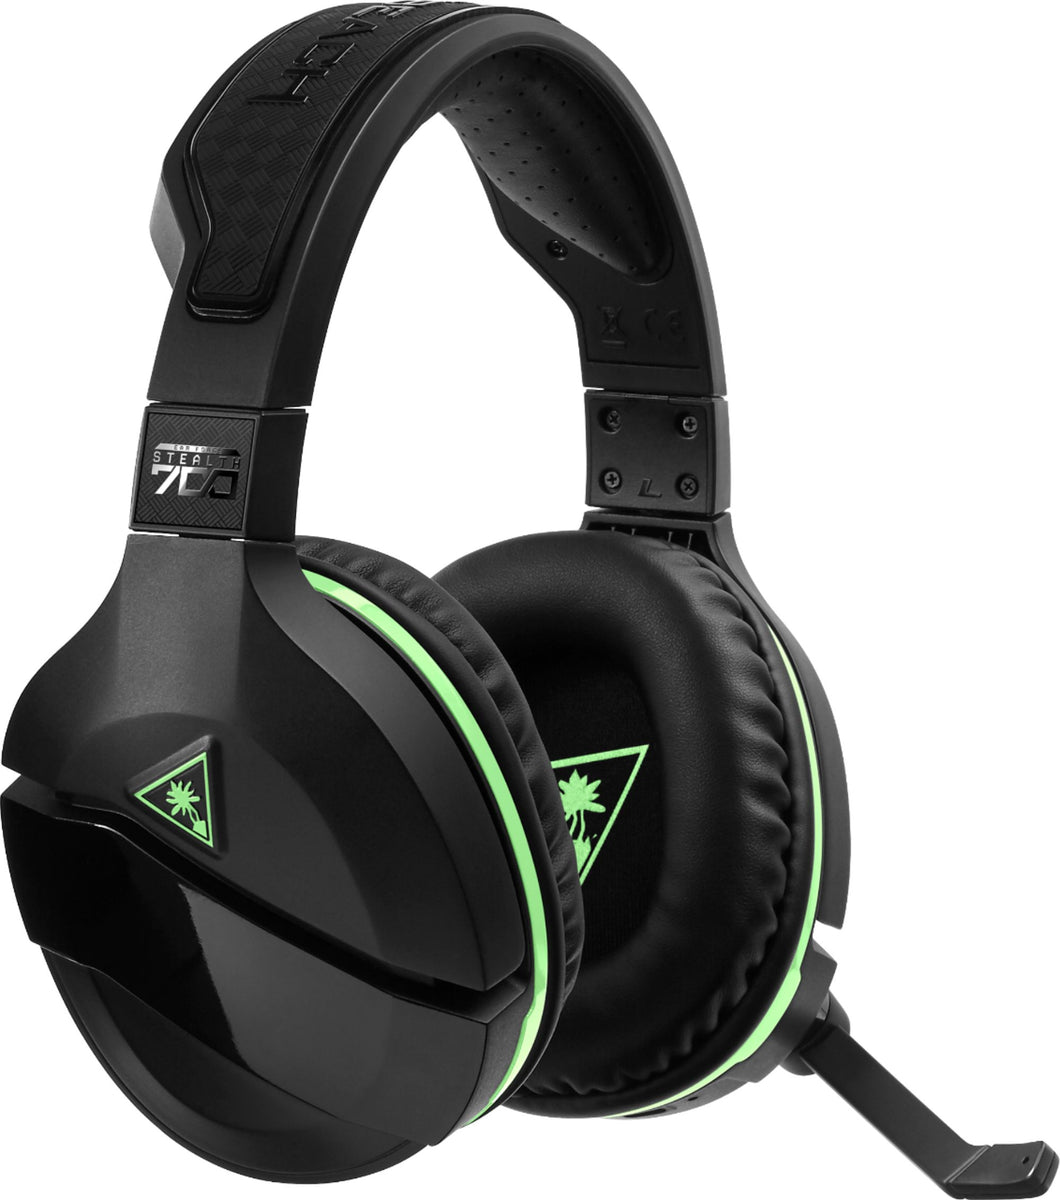 Turtle Beach Stealth 700 Premium Wireless Gaming Headset for Xbox